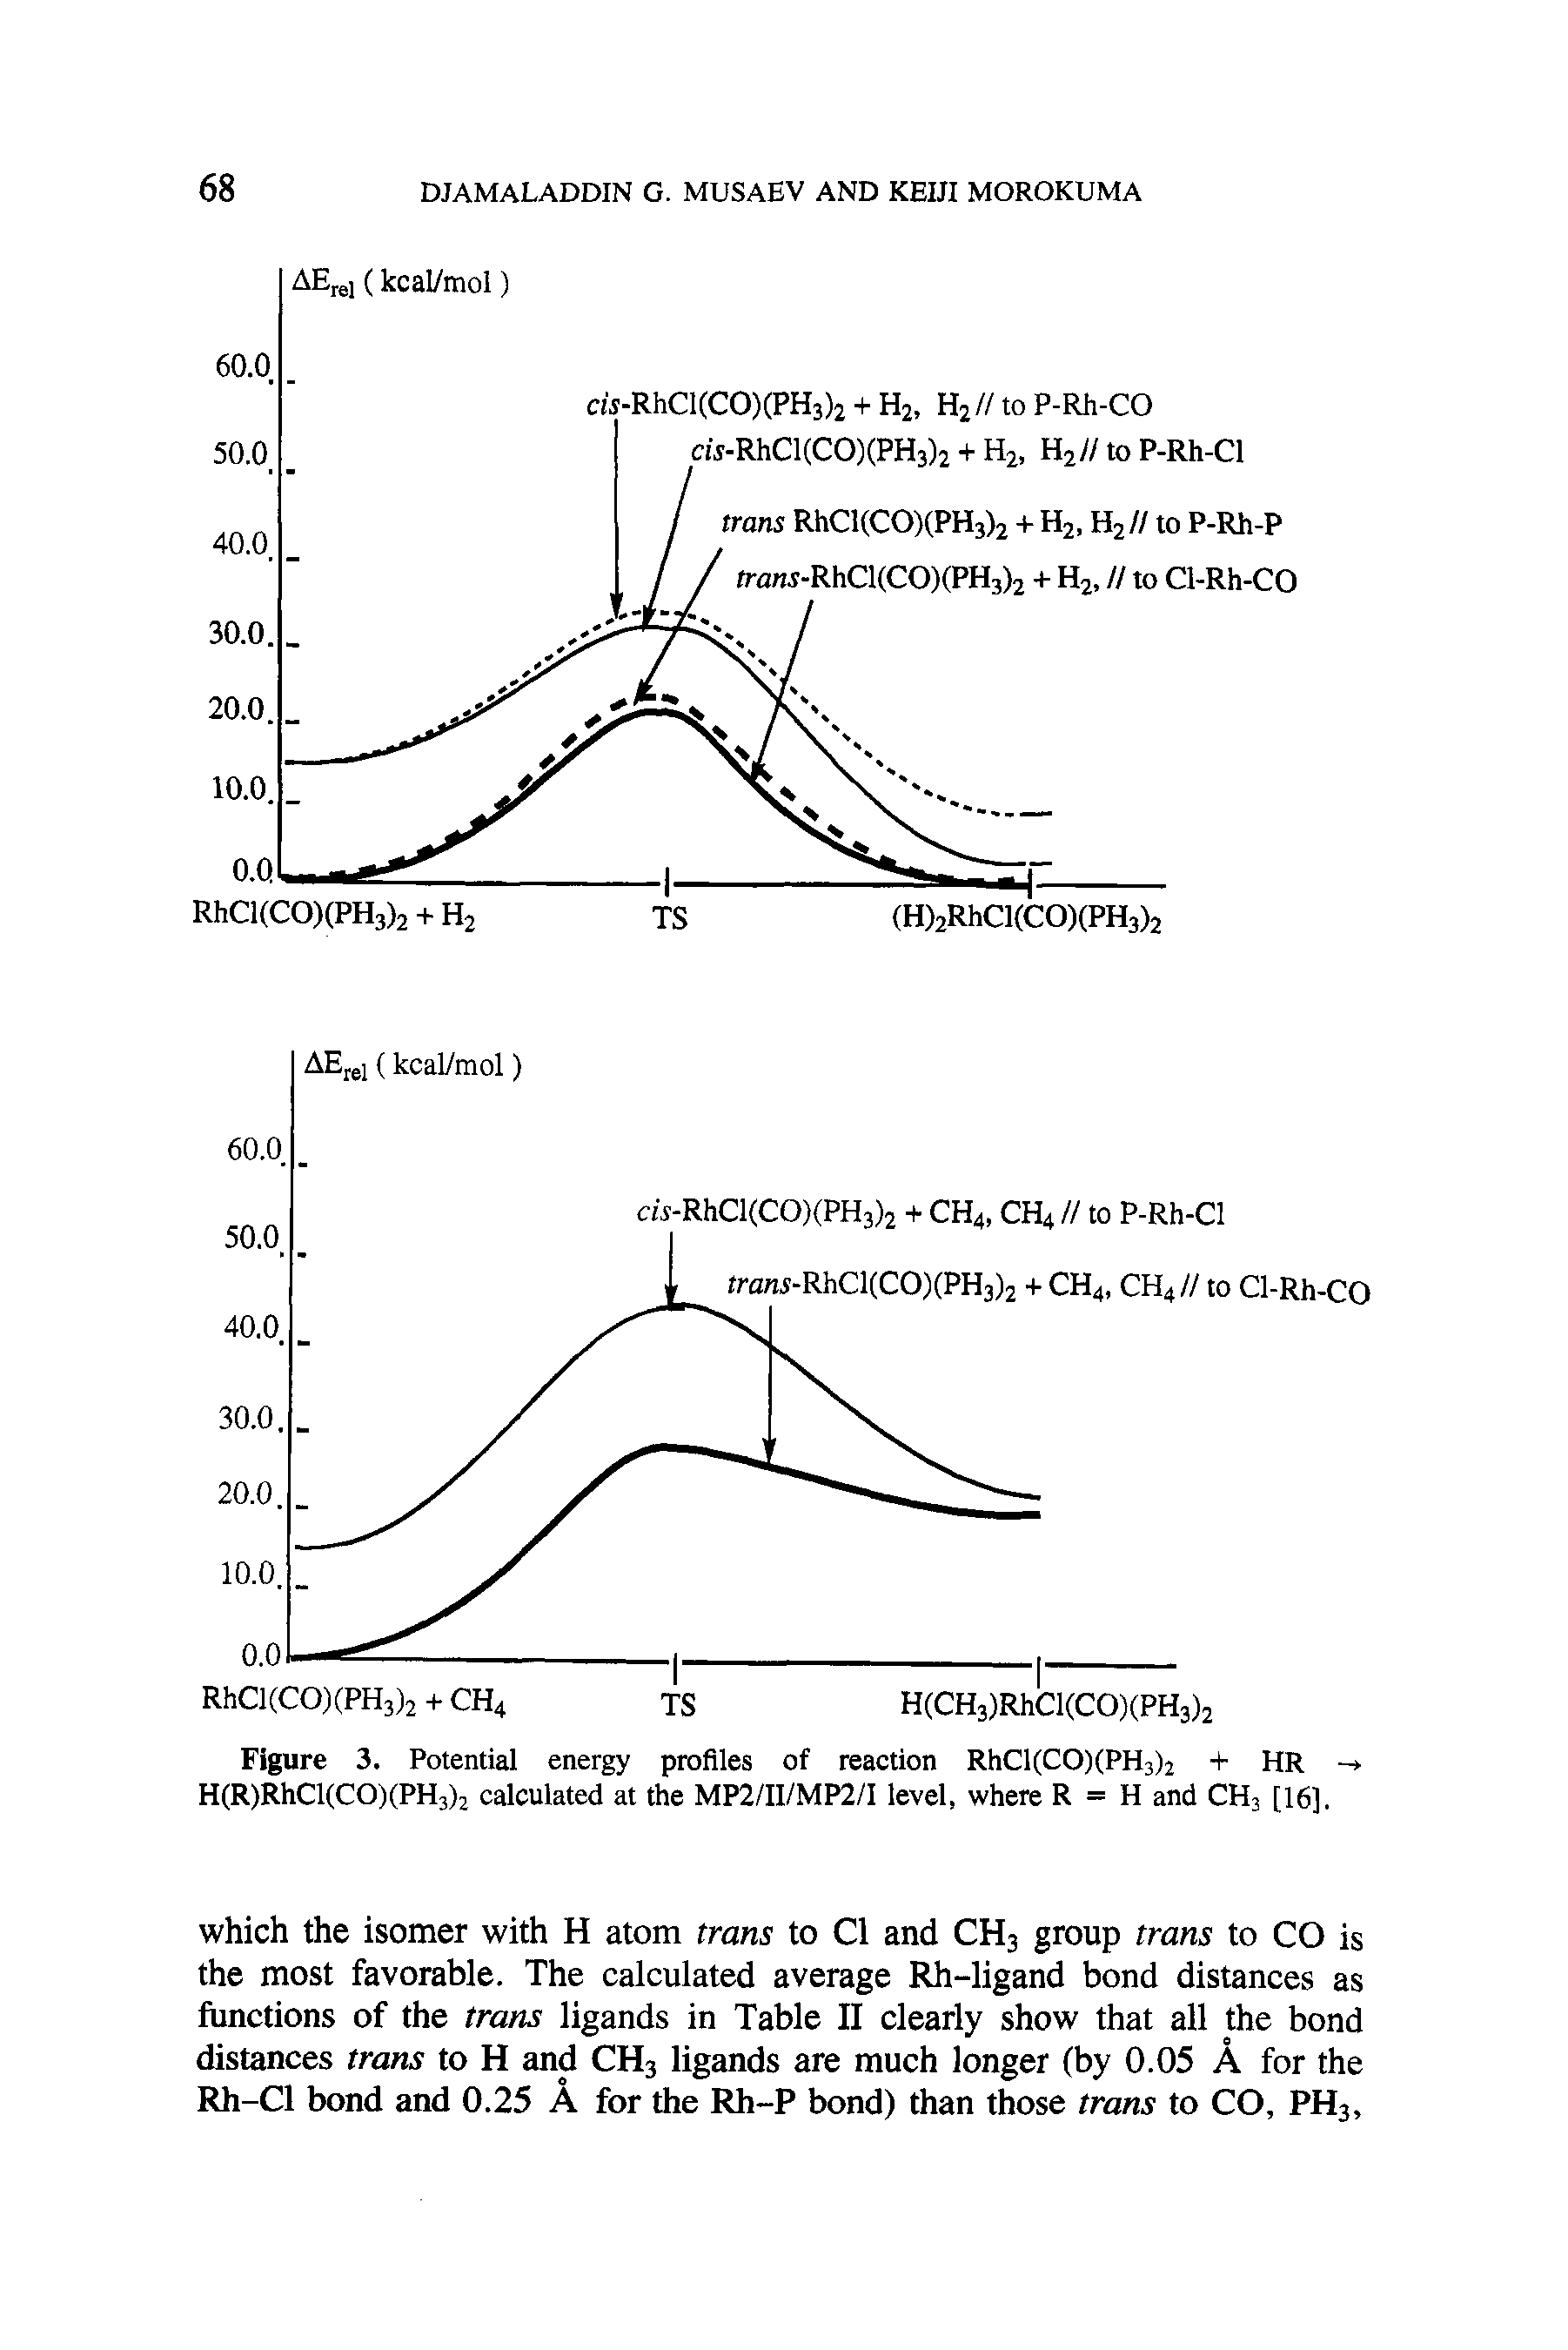 Figure 3. Potential energy profiles of reaction RhCl(CO)(PH3)2 + HR H(R)RhCl(CO)(PH3)2 calculated at the MP2/II/MP2/I level, where R = H and CH3 [16],...